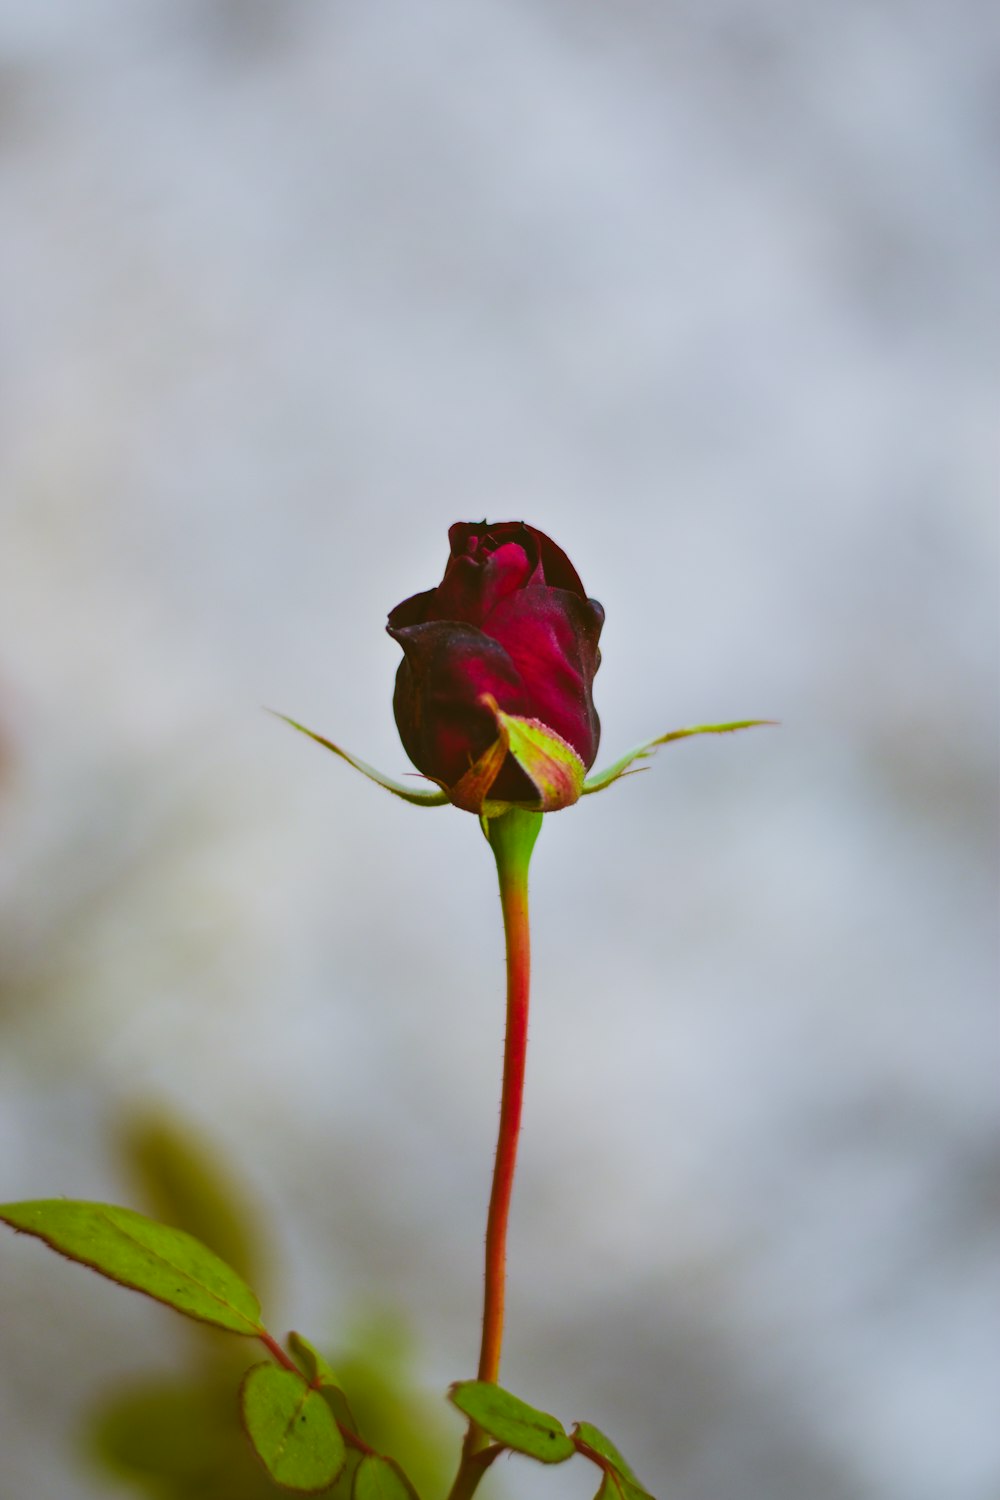 a single red rose with a green stem